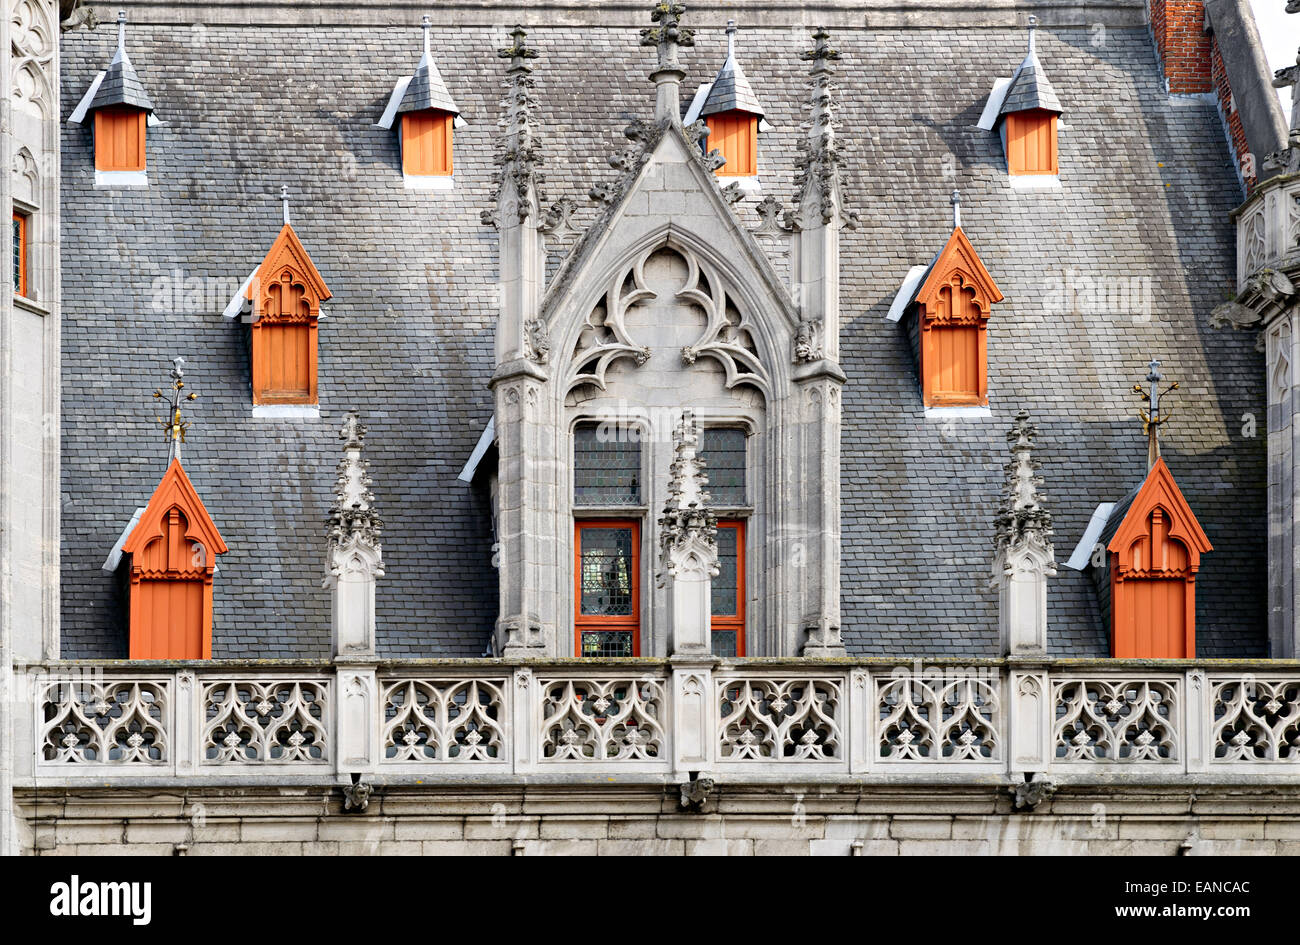 Roof of the Town Hall, Bruges, Belgium Stock Photo